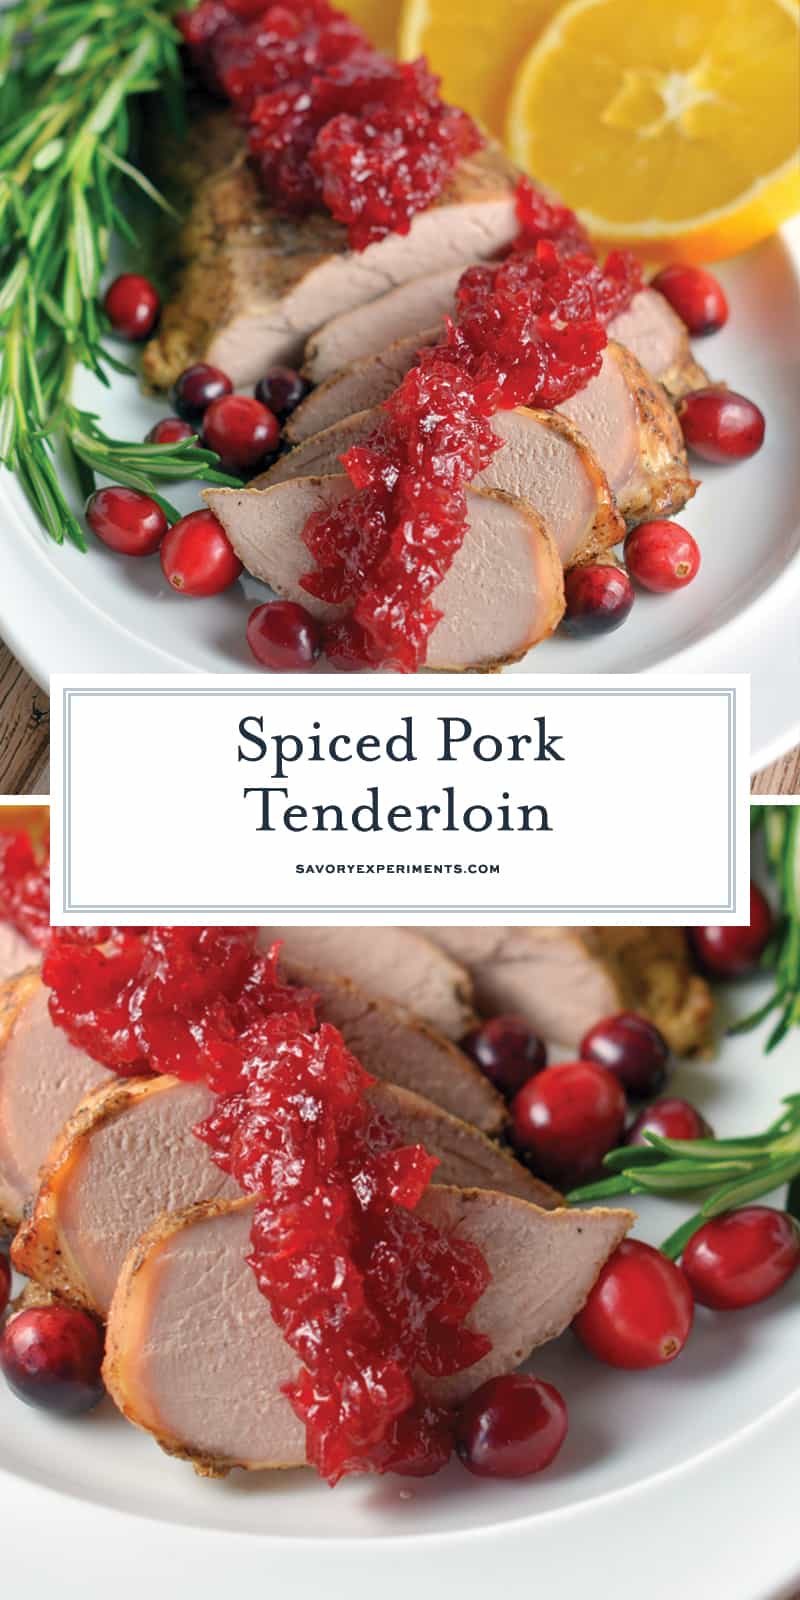 Spiced Pork Tenderloin is tender pork rubbed with spices and roasted to perfection. The amazing aroma coming from the oven is just a holiday bonus! #porktenderloin #holidayentree www.savoryexperiments.com